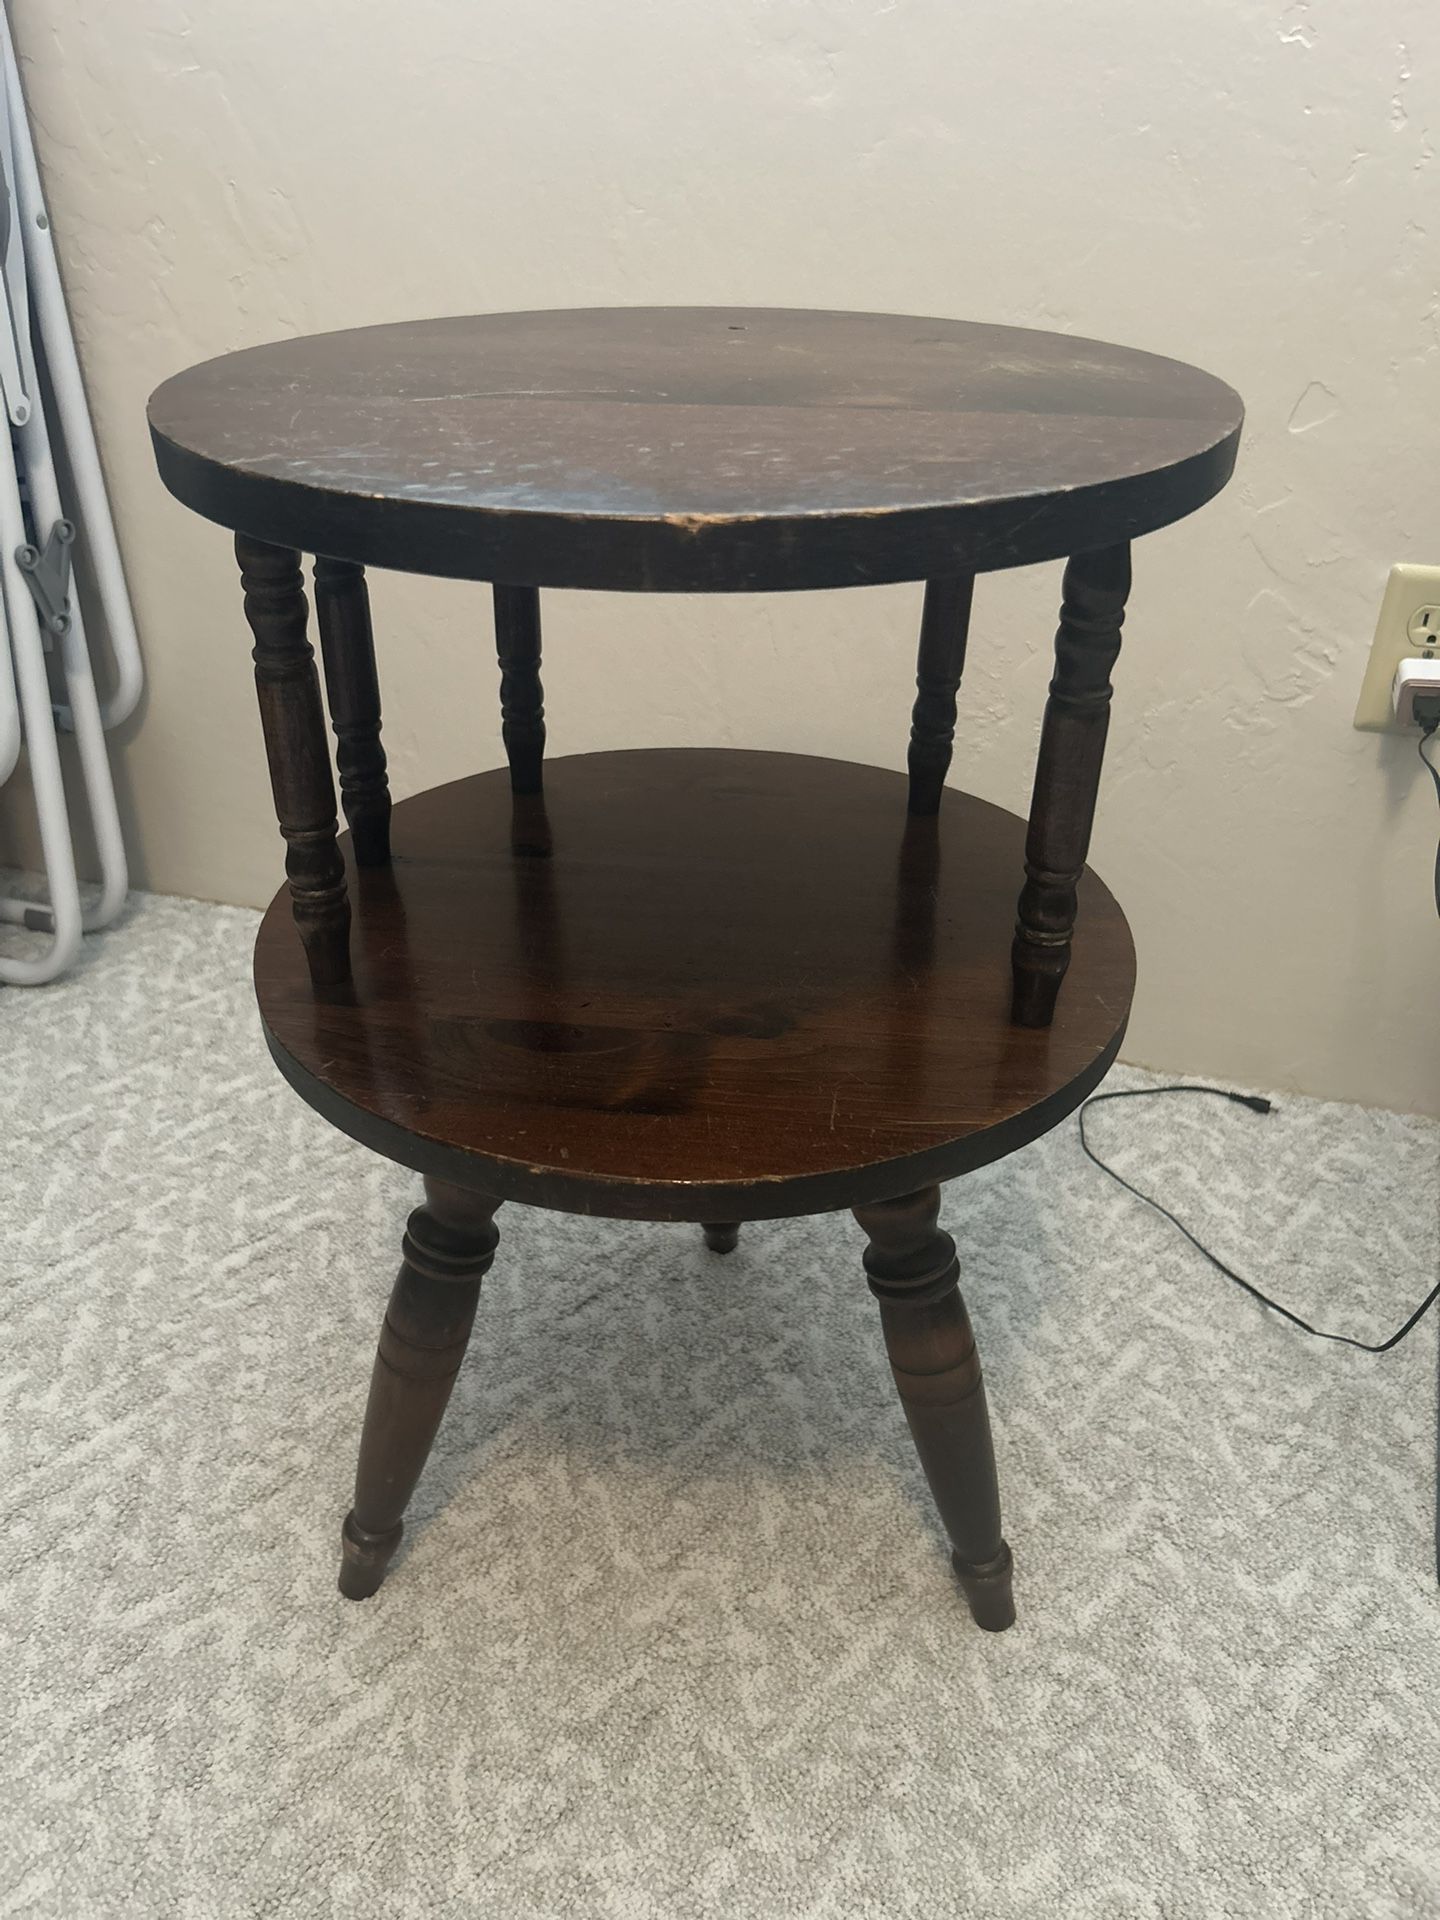 End Table Wood